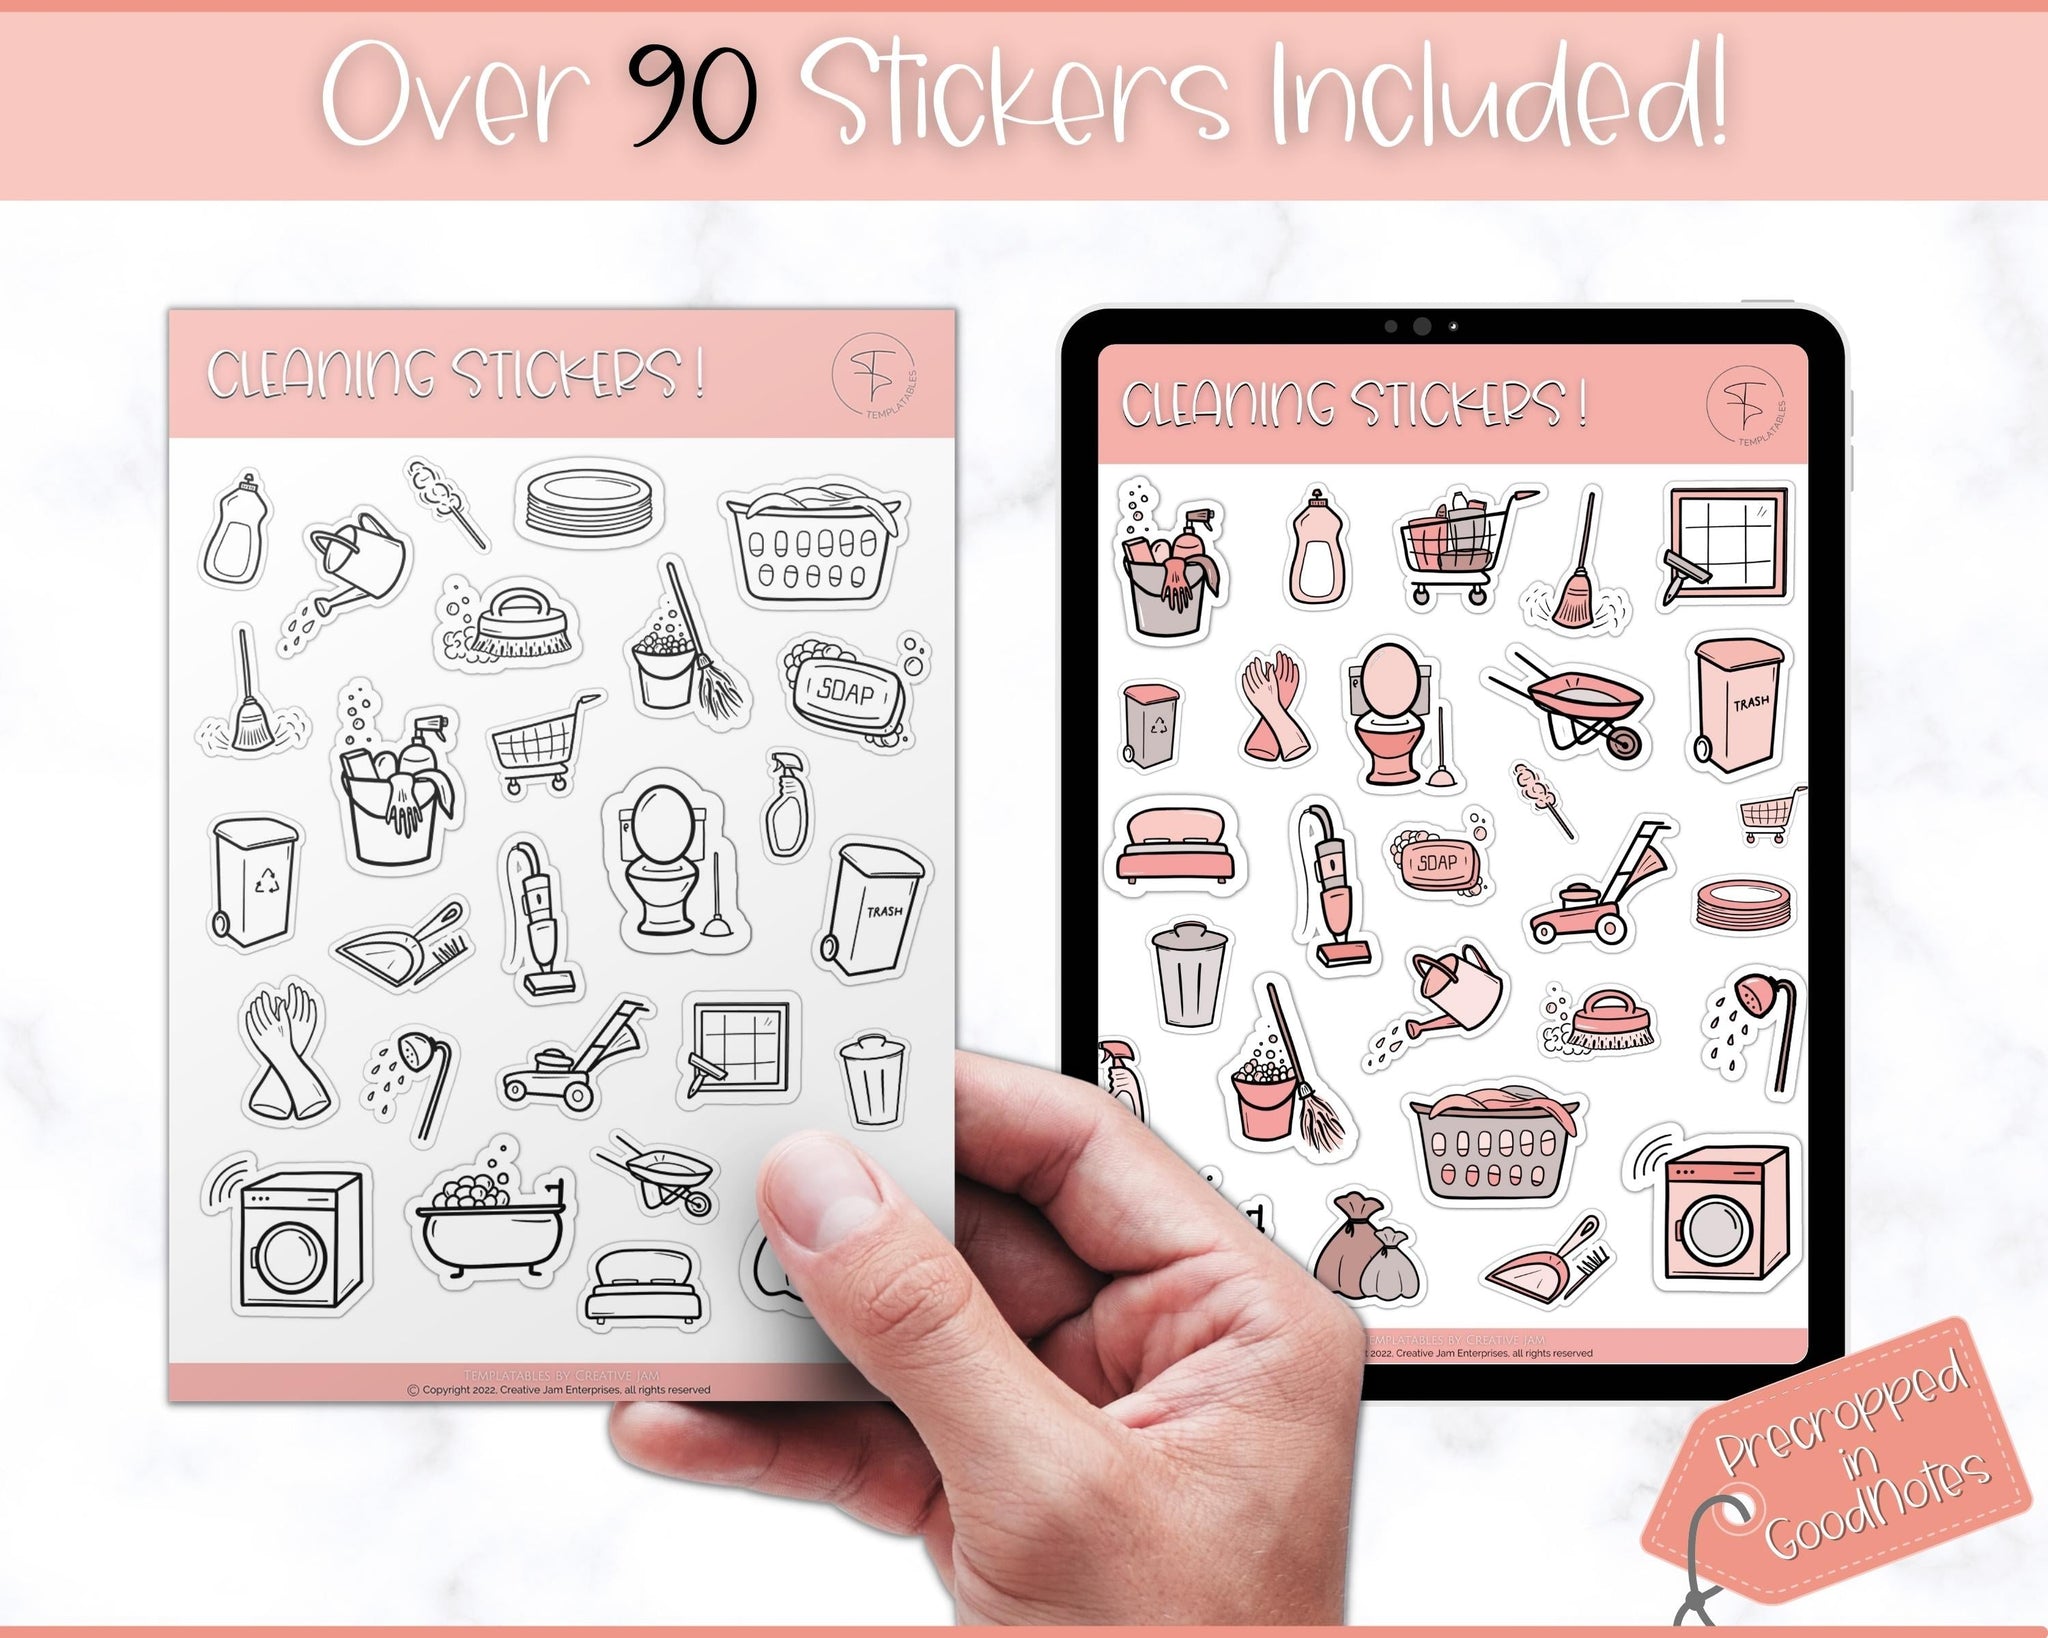 The Cute Sticker Pack (Digital Stickers, Good Notes Stickers) By